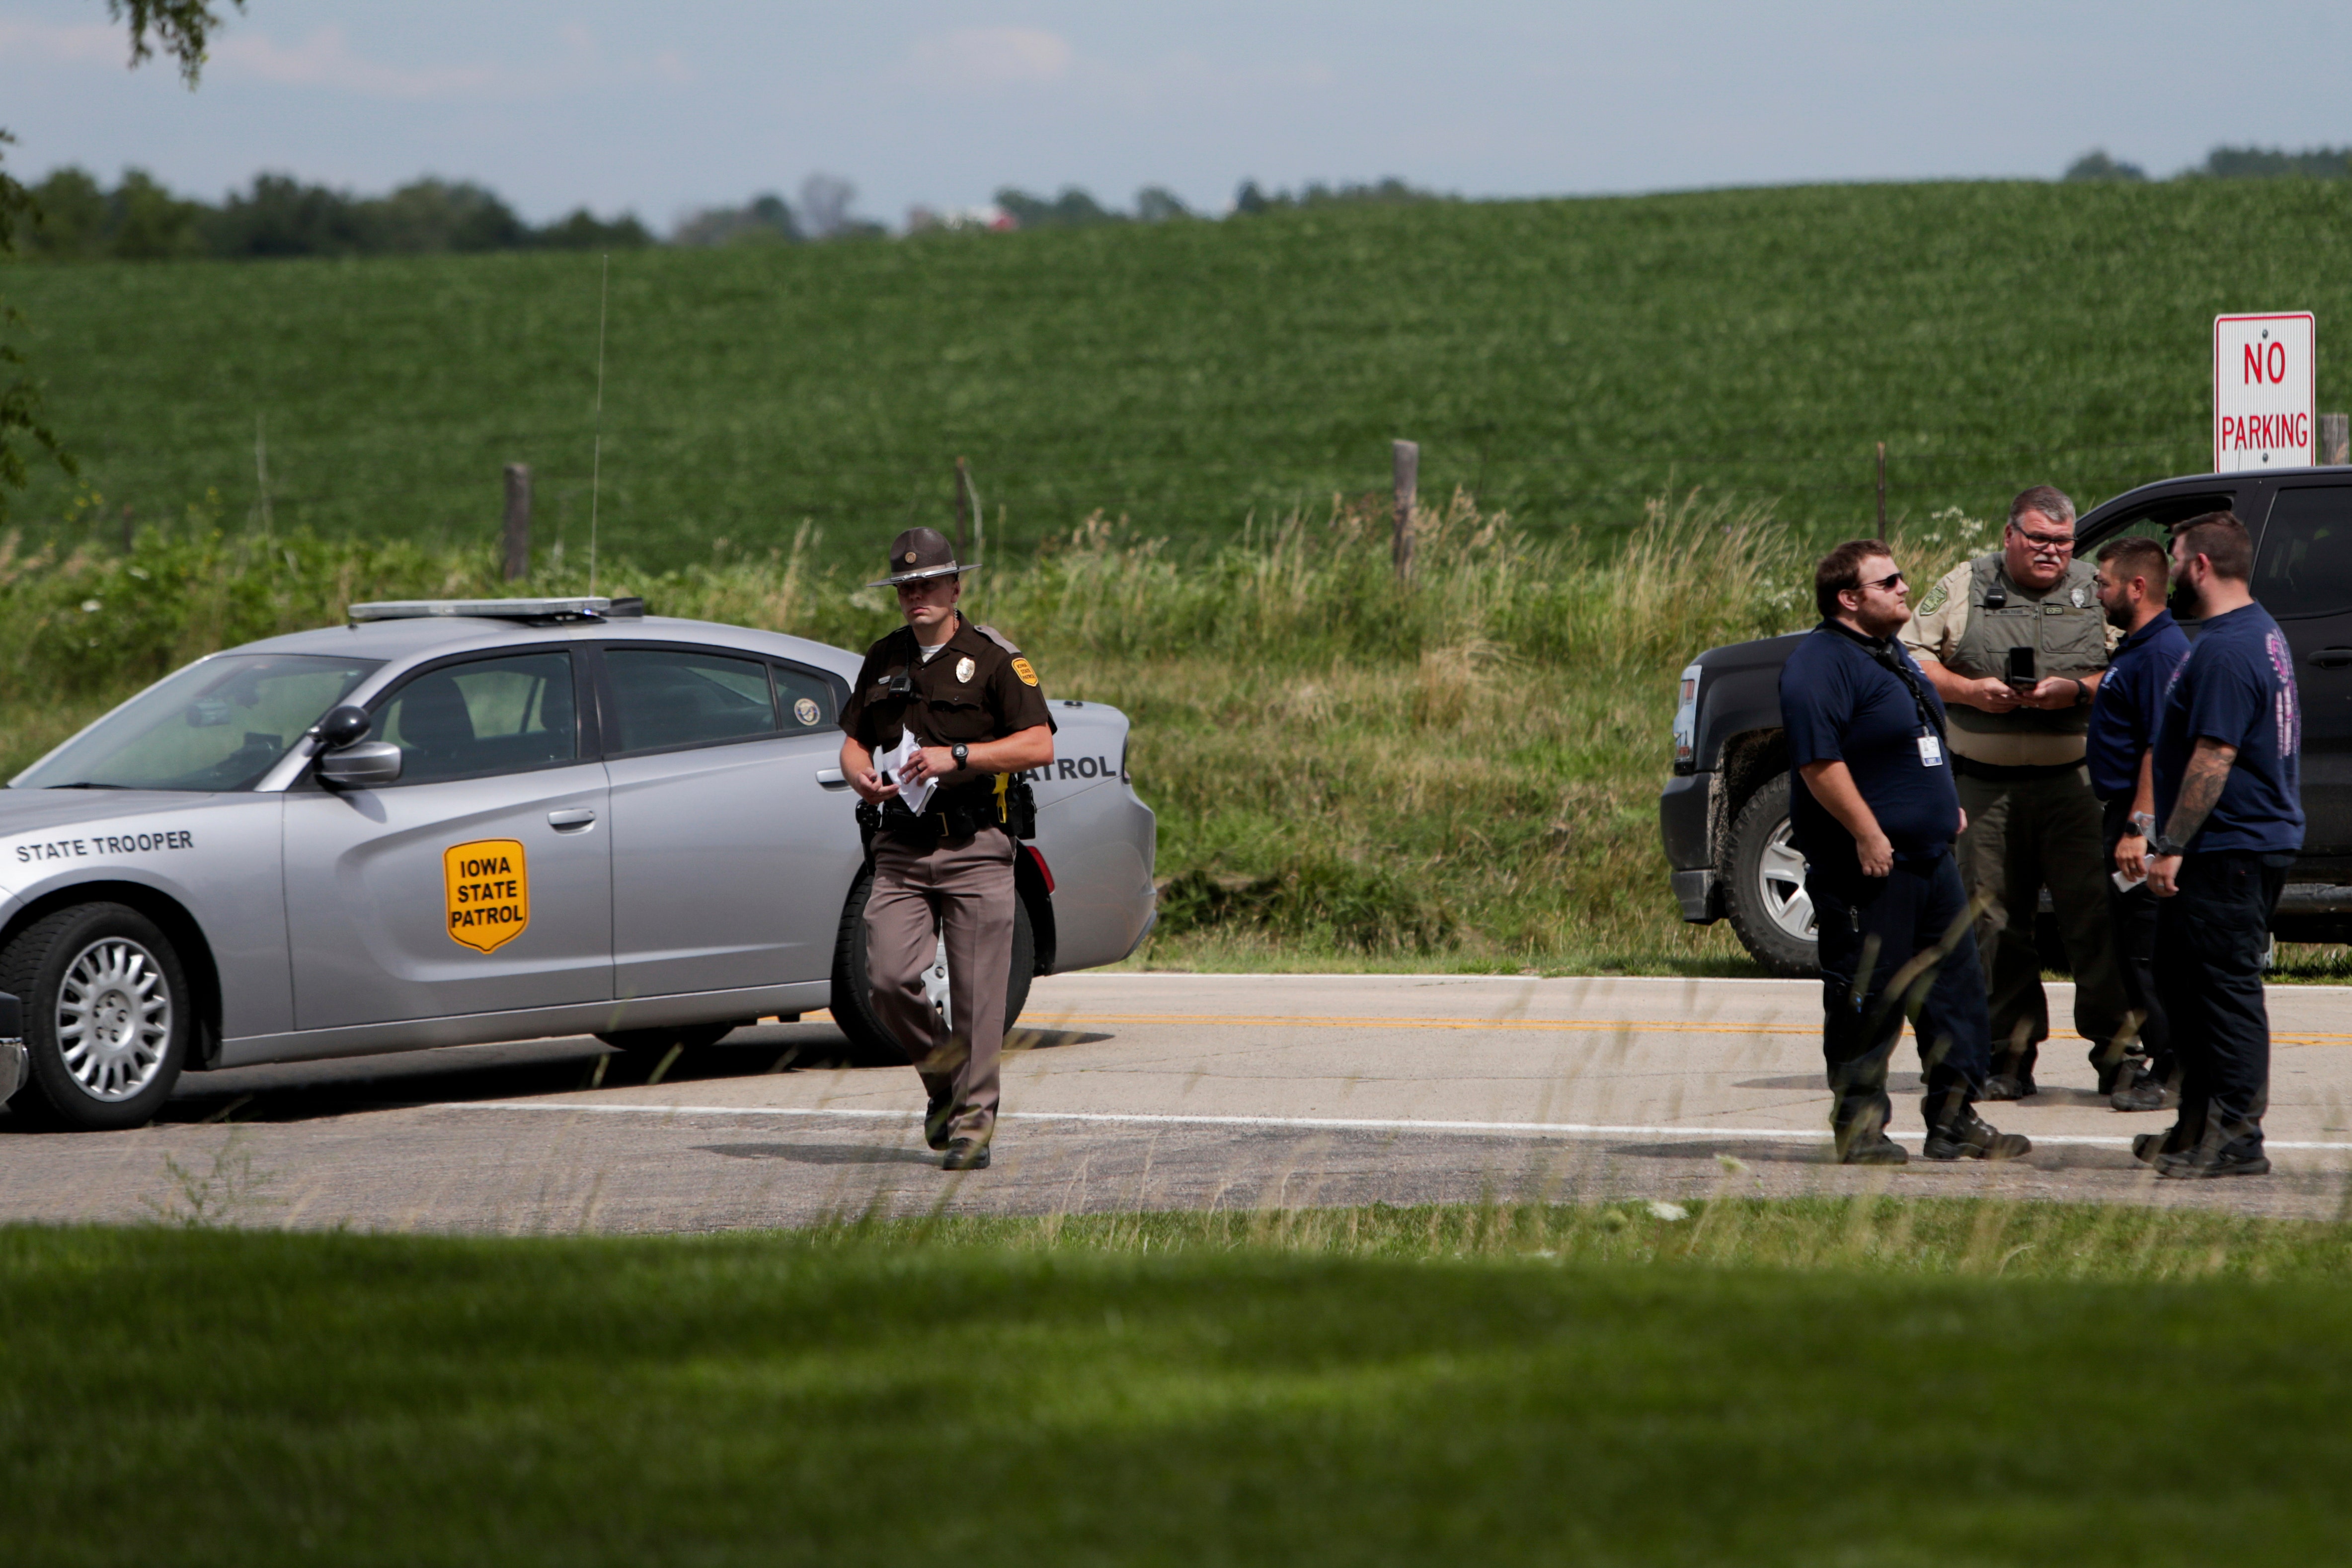 Iowa state park campground shooting leaves 3 dead, gunman also dead